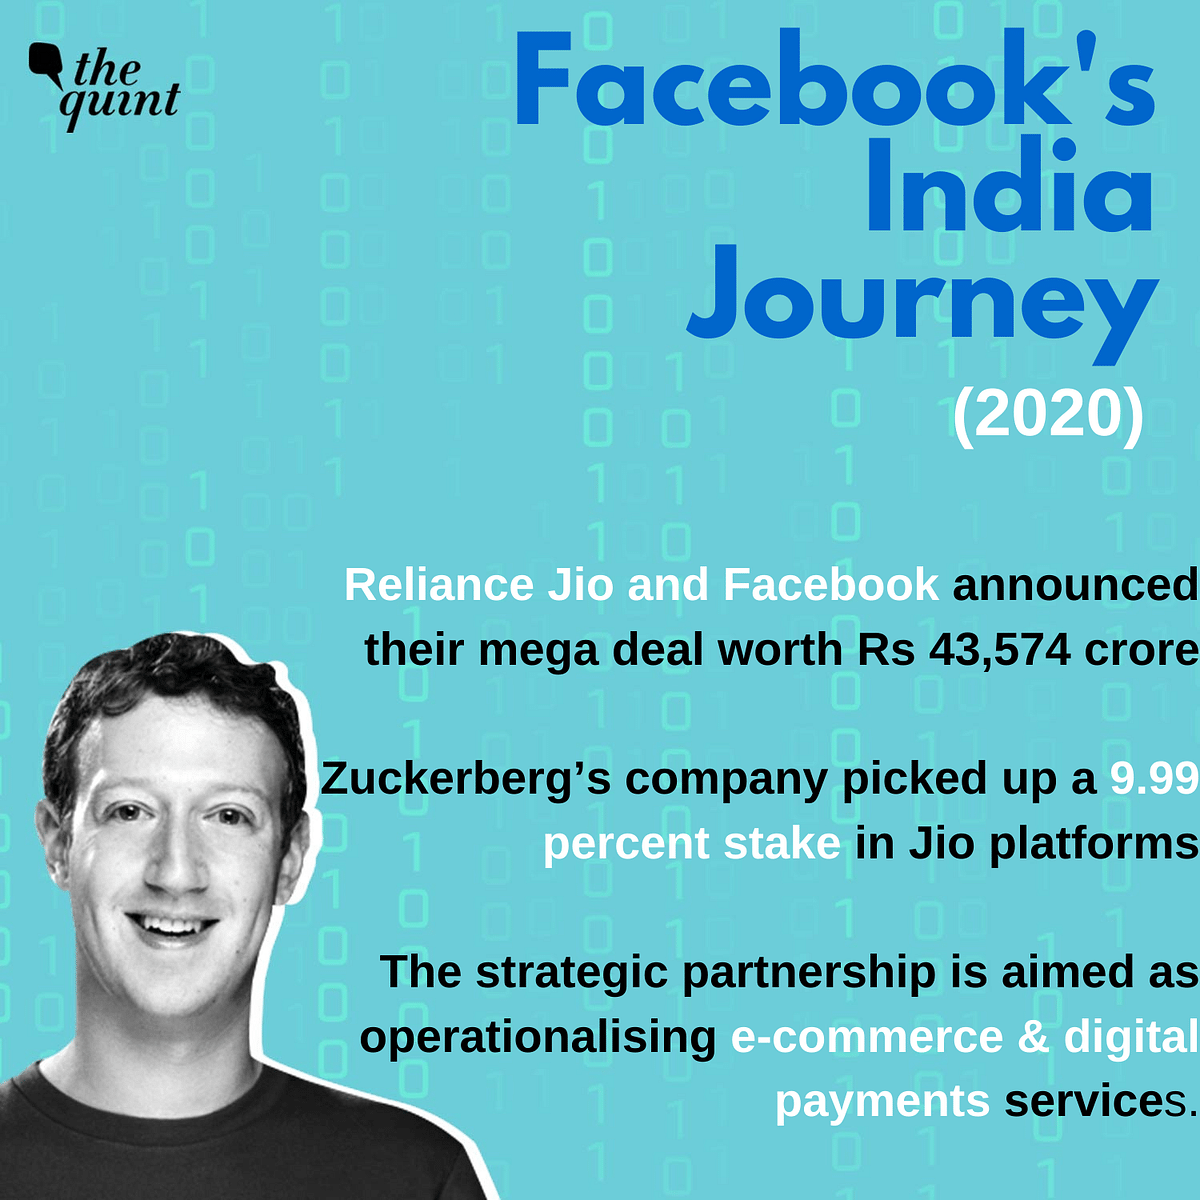 Here’s a look at Facebook’s 14-year timeline and its tryst with India.